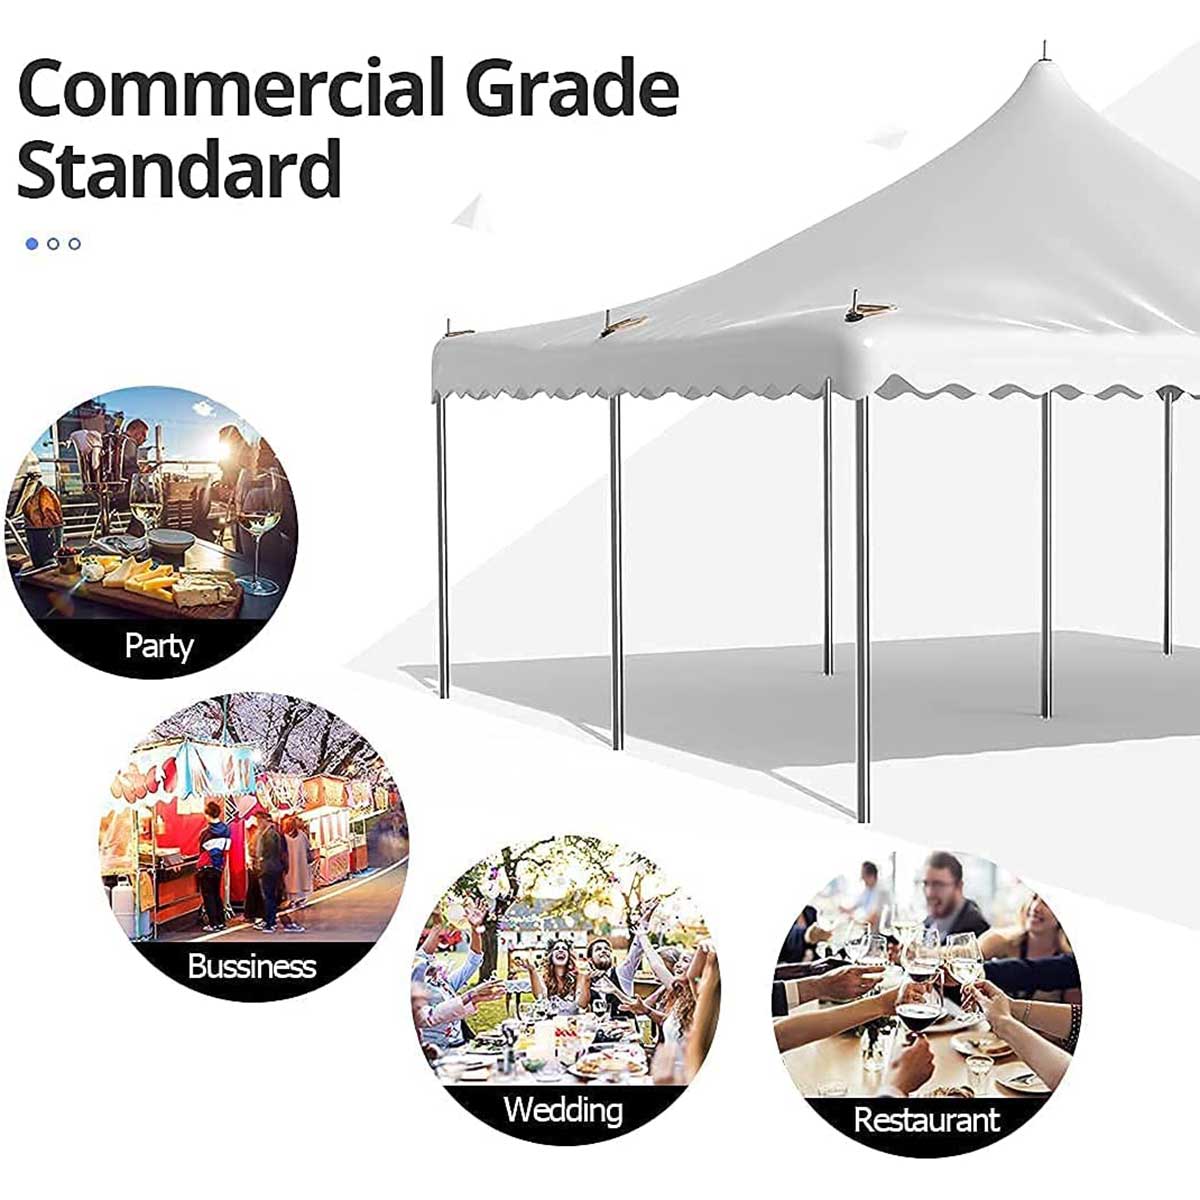 Commercial grade standard 20'X20' Fire Resistant Party Tent